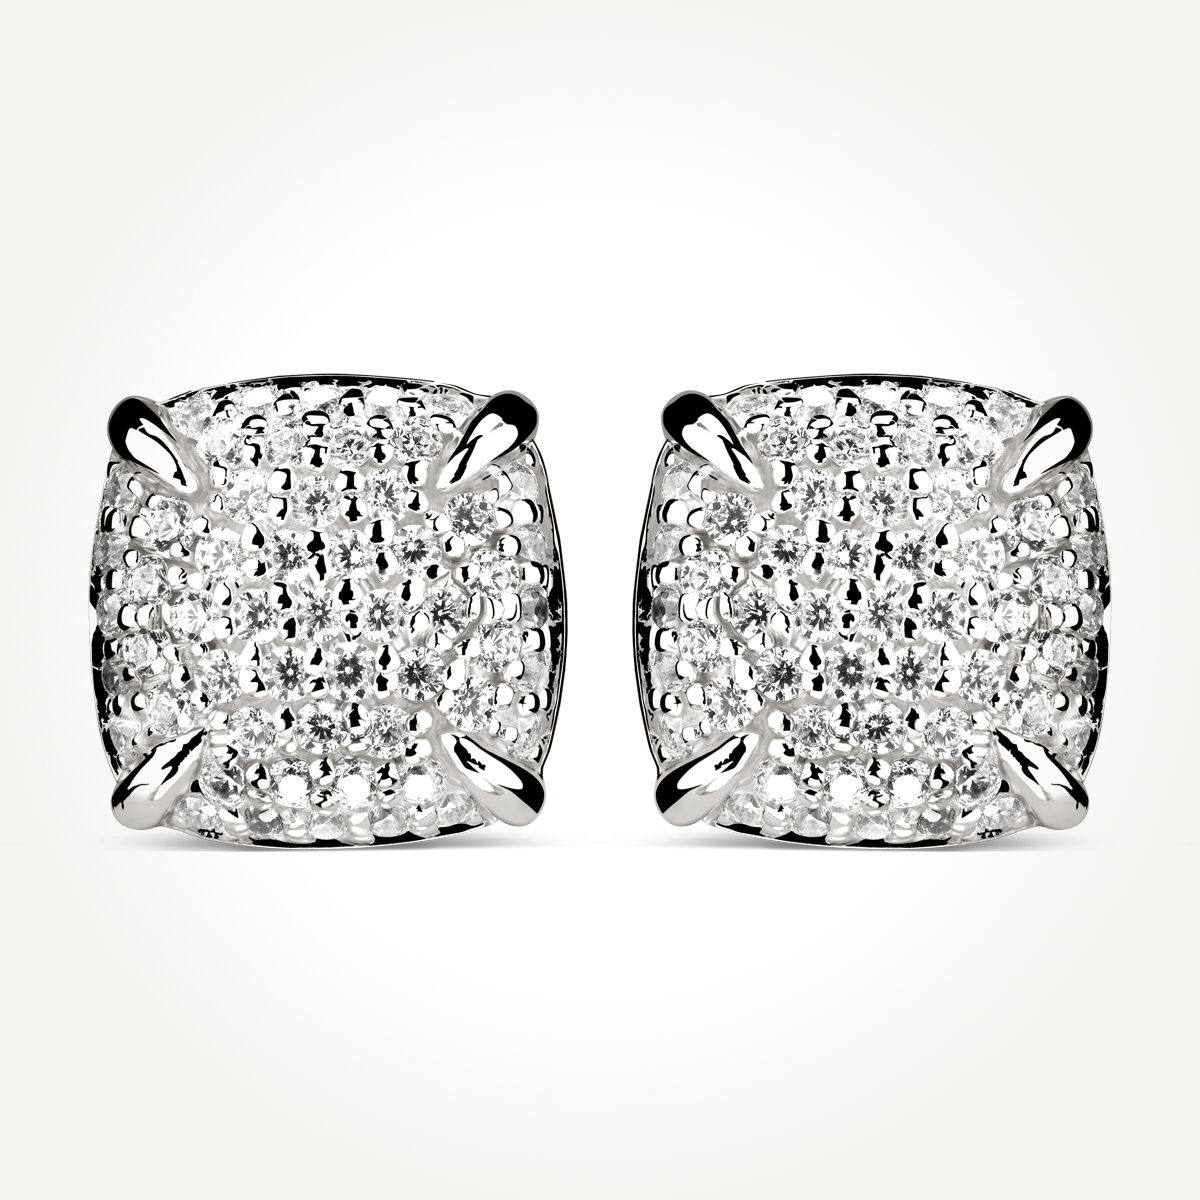 14KT White Gold Square Cluster Earrings 0.44 CT. T.W.